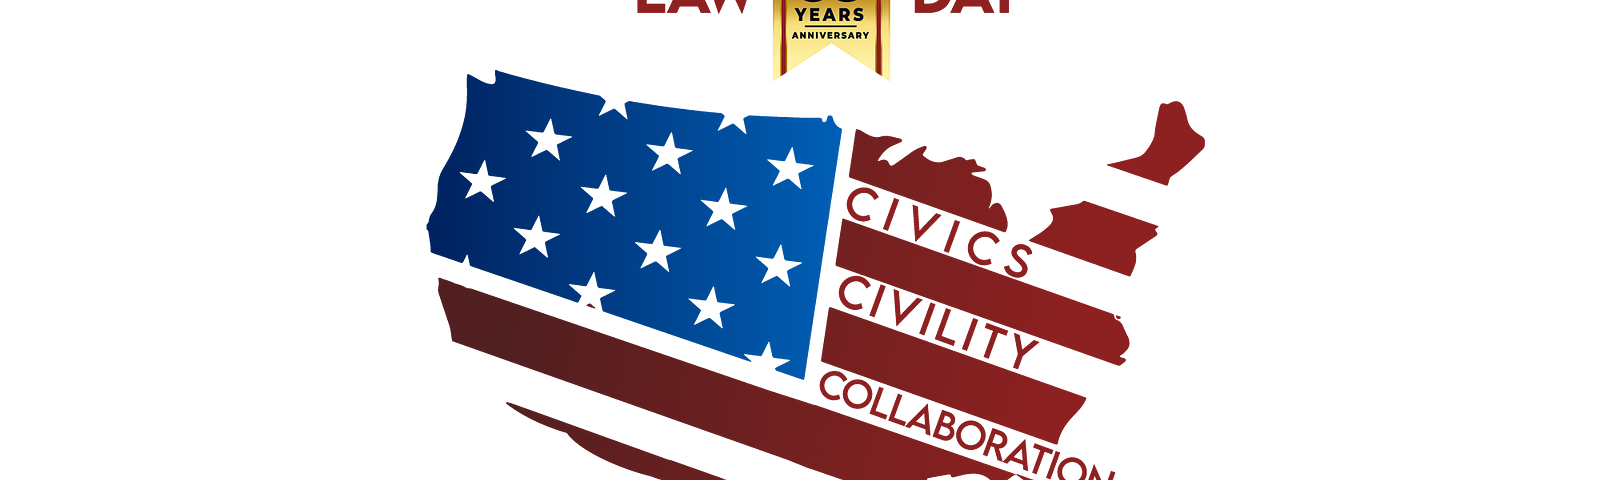 The United States appears in blue and red in a stars and stripes motif. Within the motif are the words, “CIVICS, CIVILITY, AND COLLABORATION.” Above the motif, red text surrounding a golden ribbon end reads, “Law Day 2023.” The ribbon end graphic includes text that reads, “65 Years Anniversary.” At bottom, blue, gray, and red text reads, “Cornerstones of Democracy.”